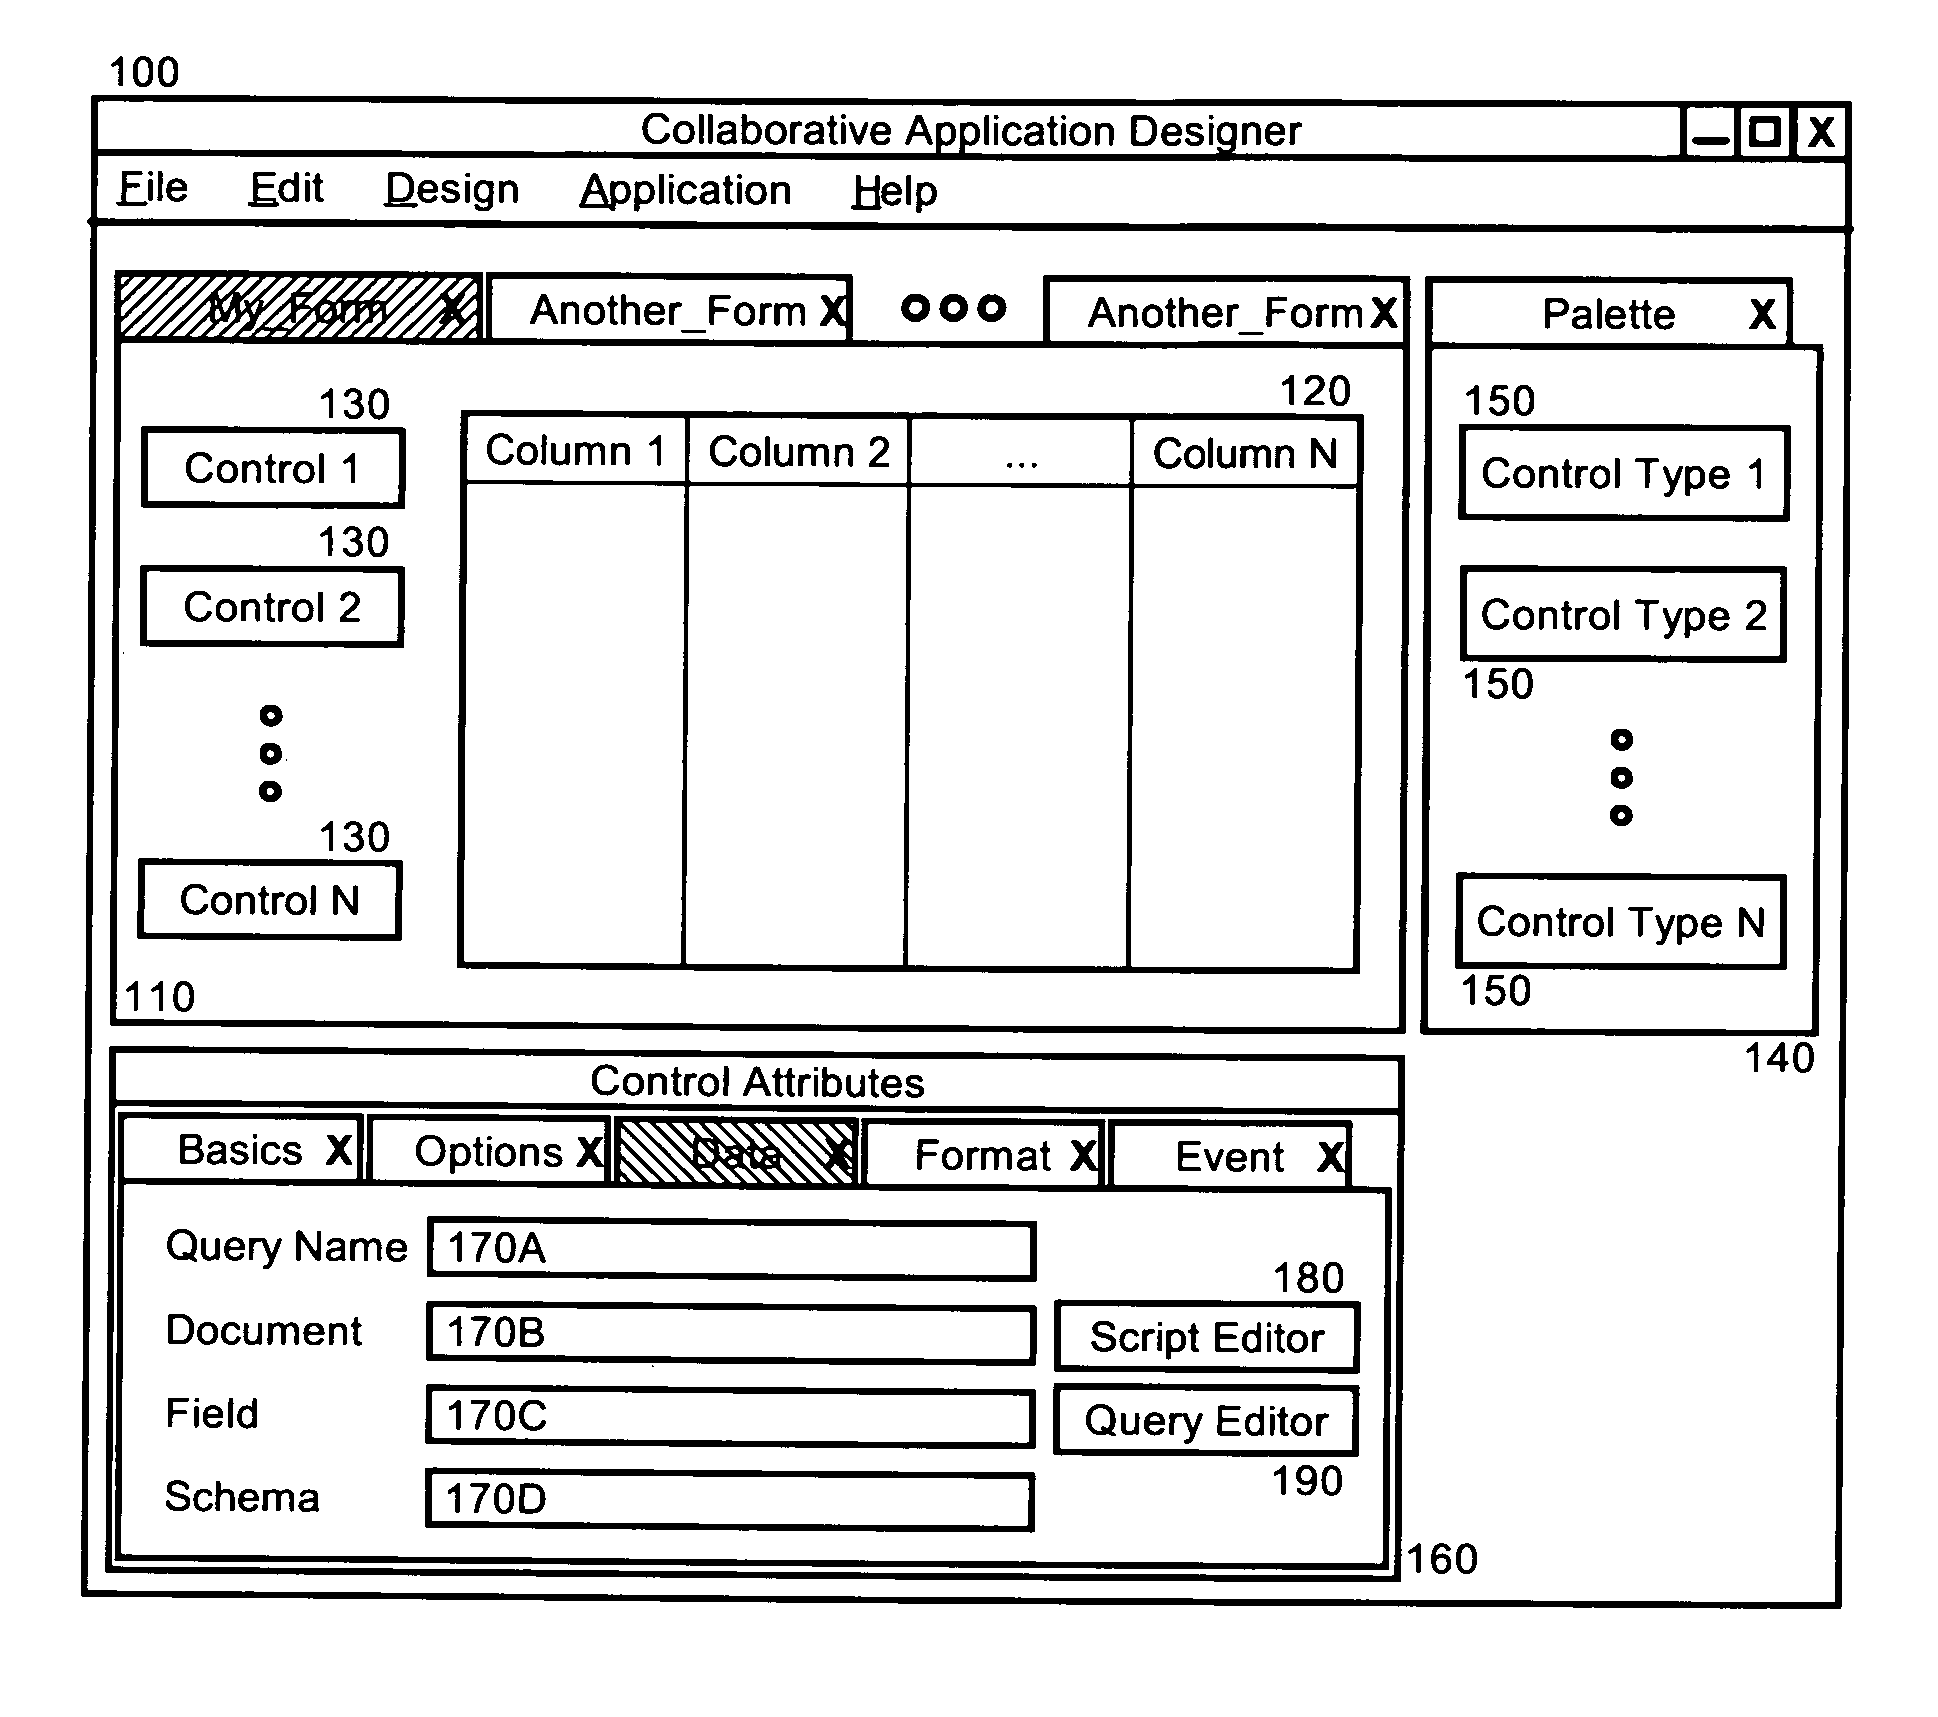 Generating a separable query design object and database schema through visual view editing